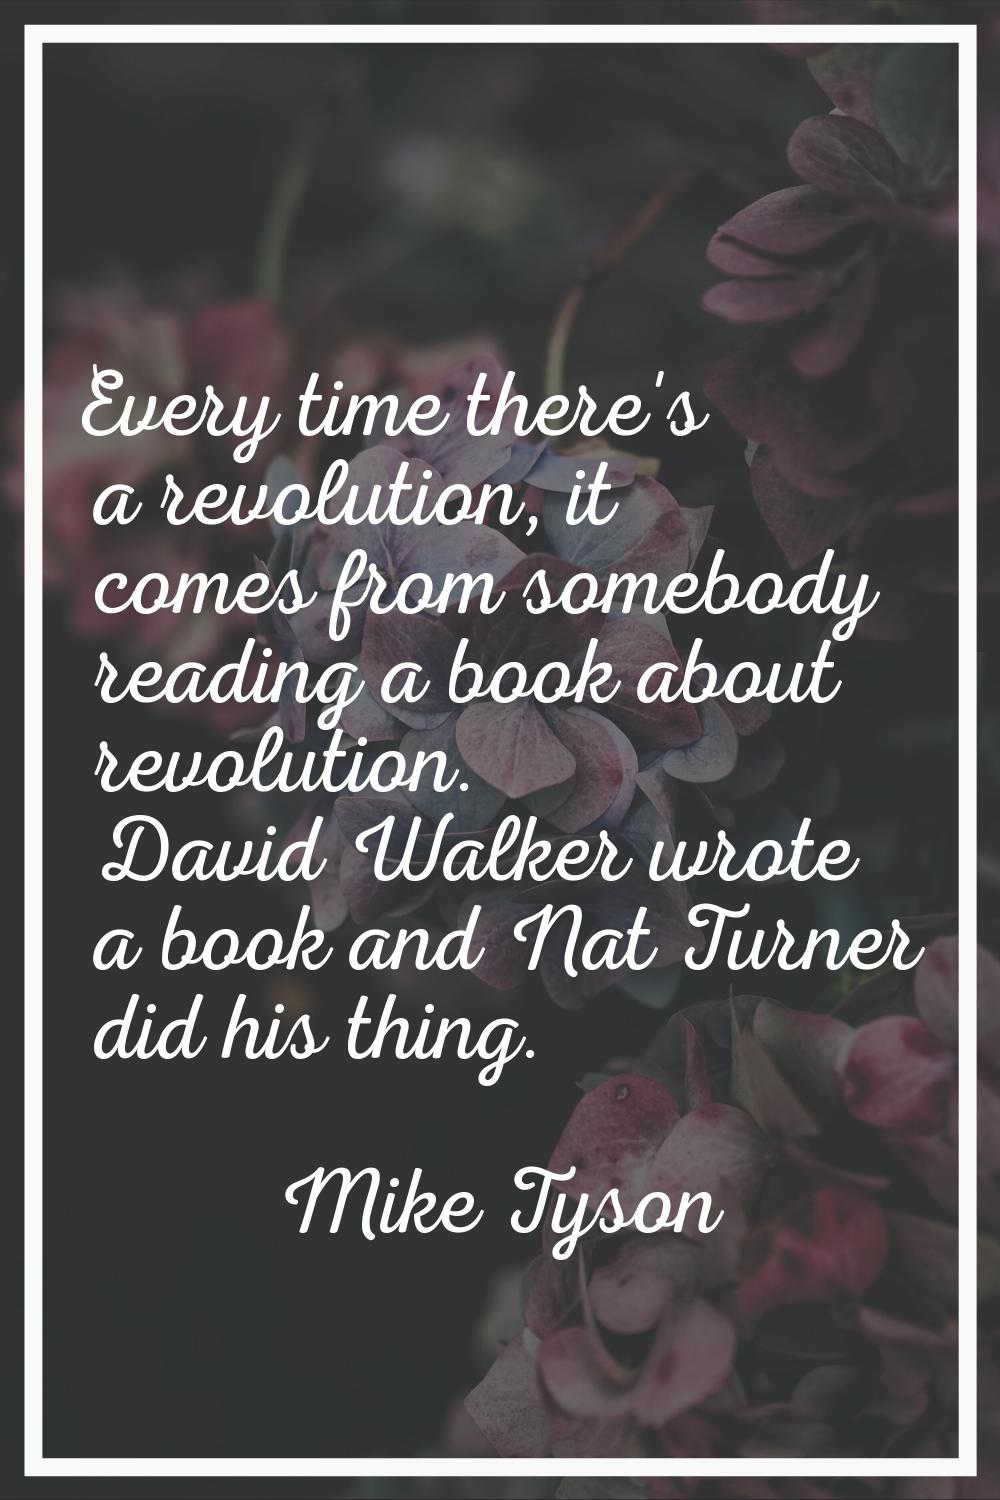 Every time there's a revolution, it comes from somebody reading a book about revolution. David Walk